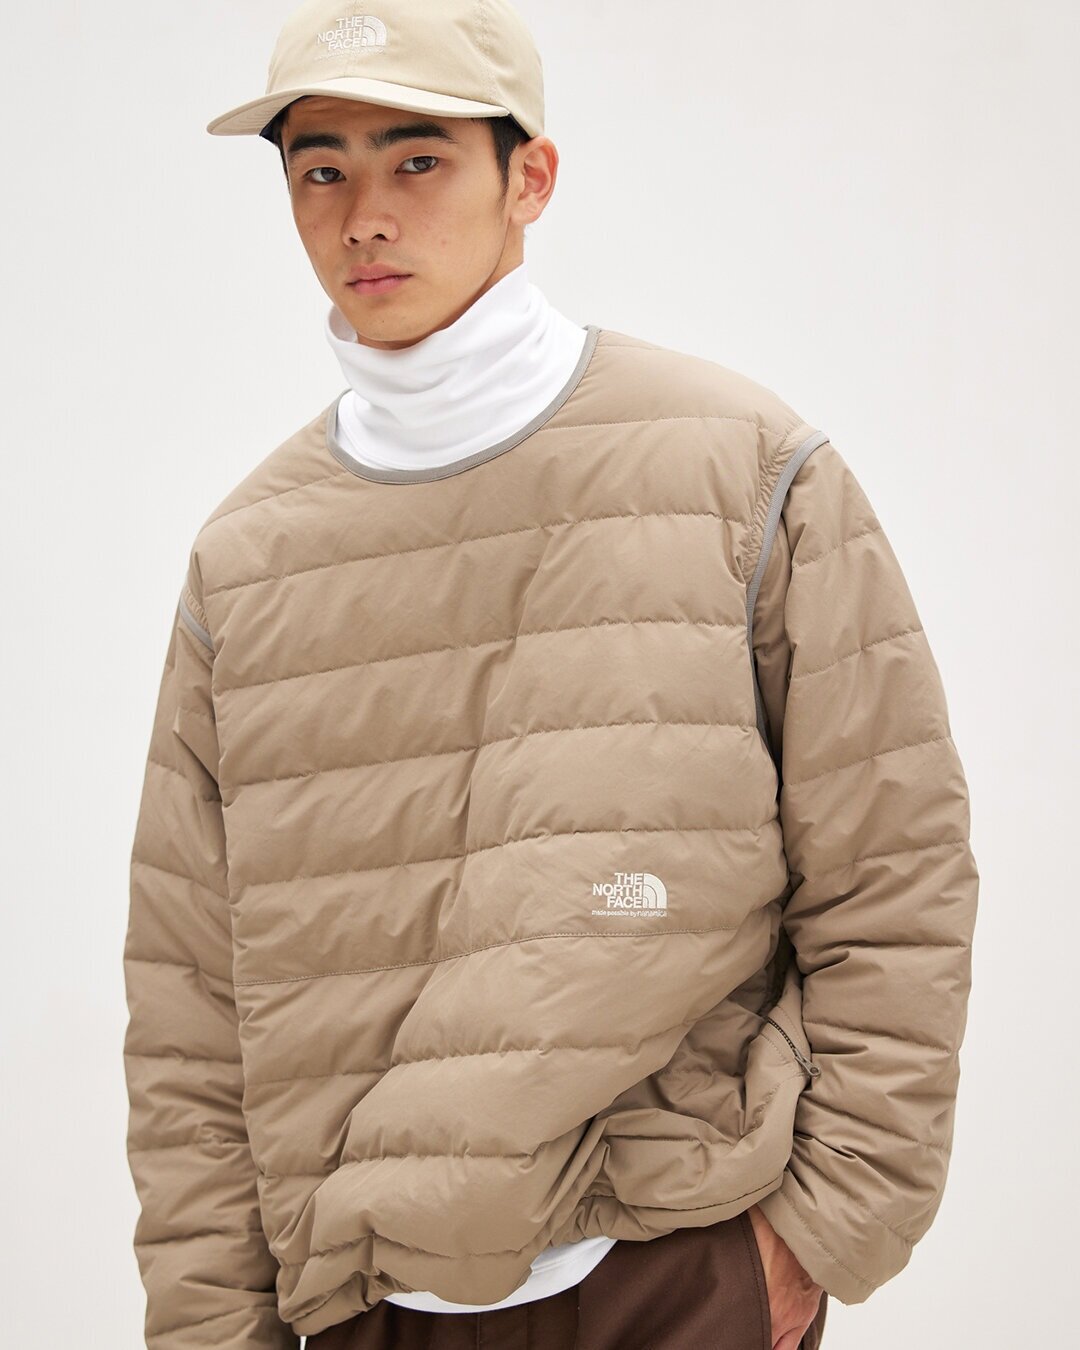 nanamica and The North Face Purple Label Team Up for Autumn/Winter 